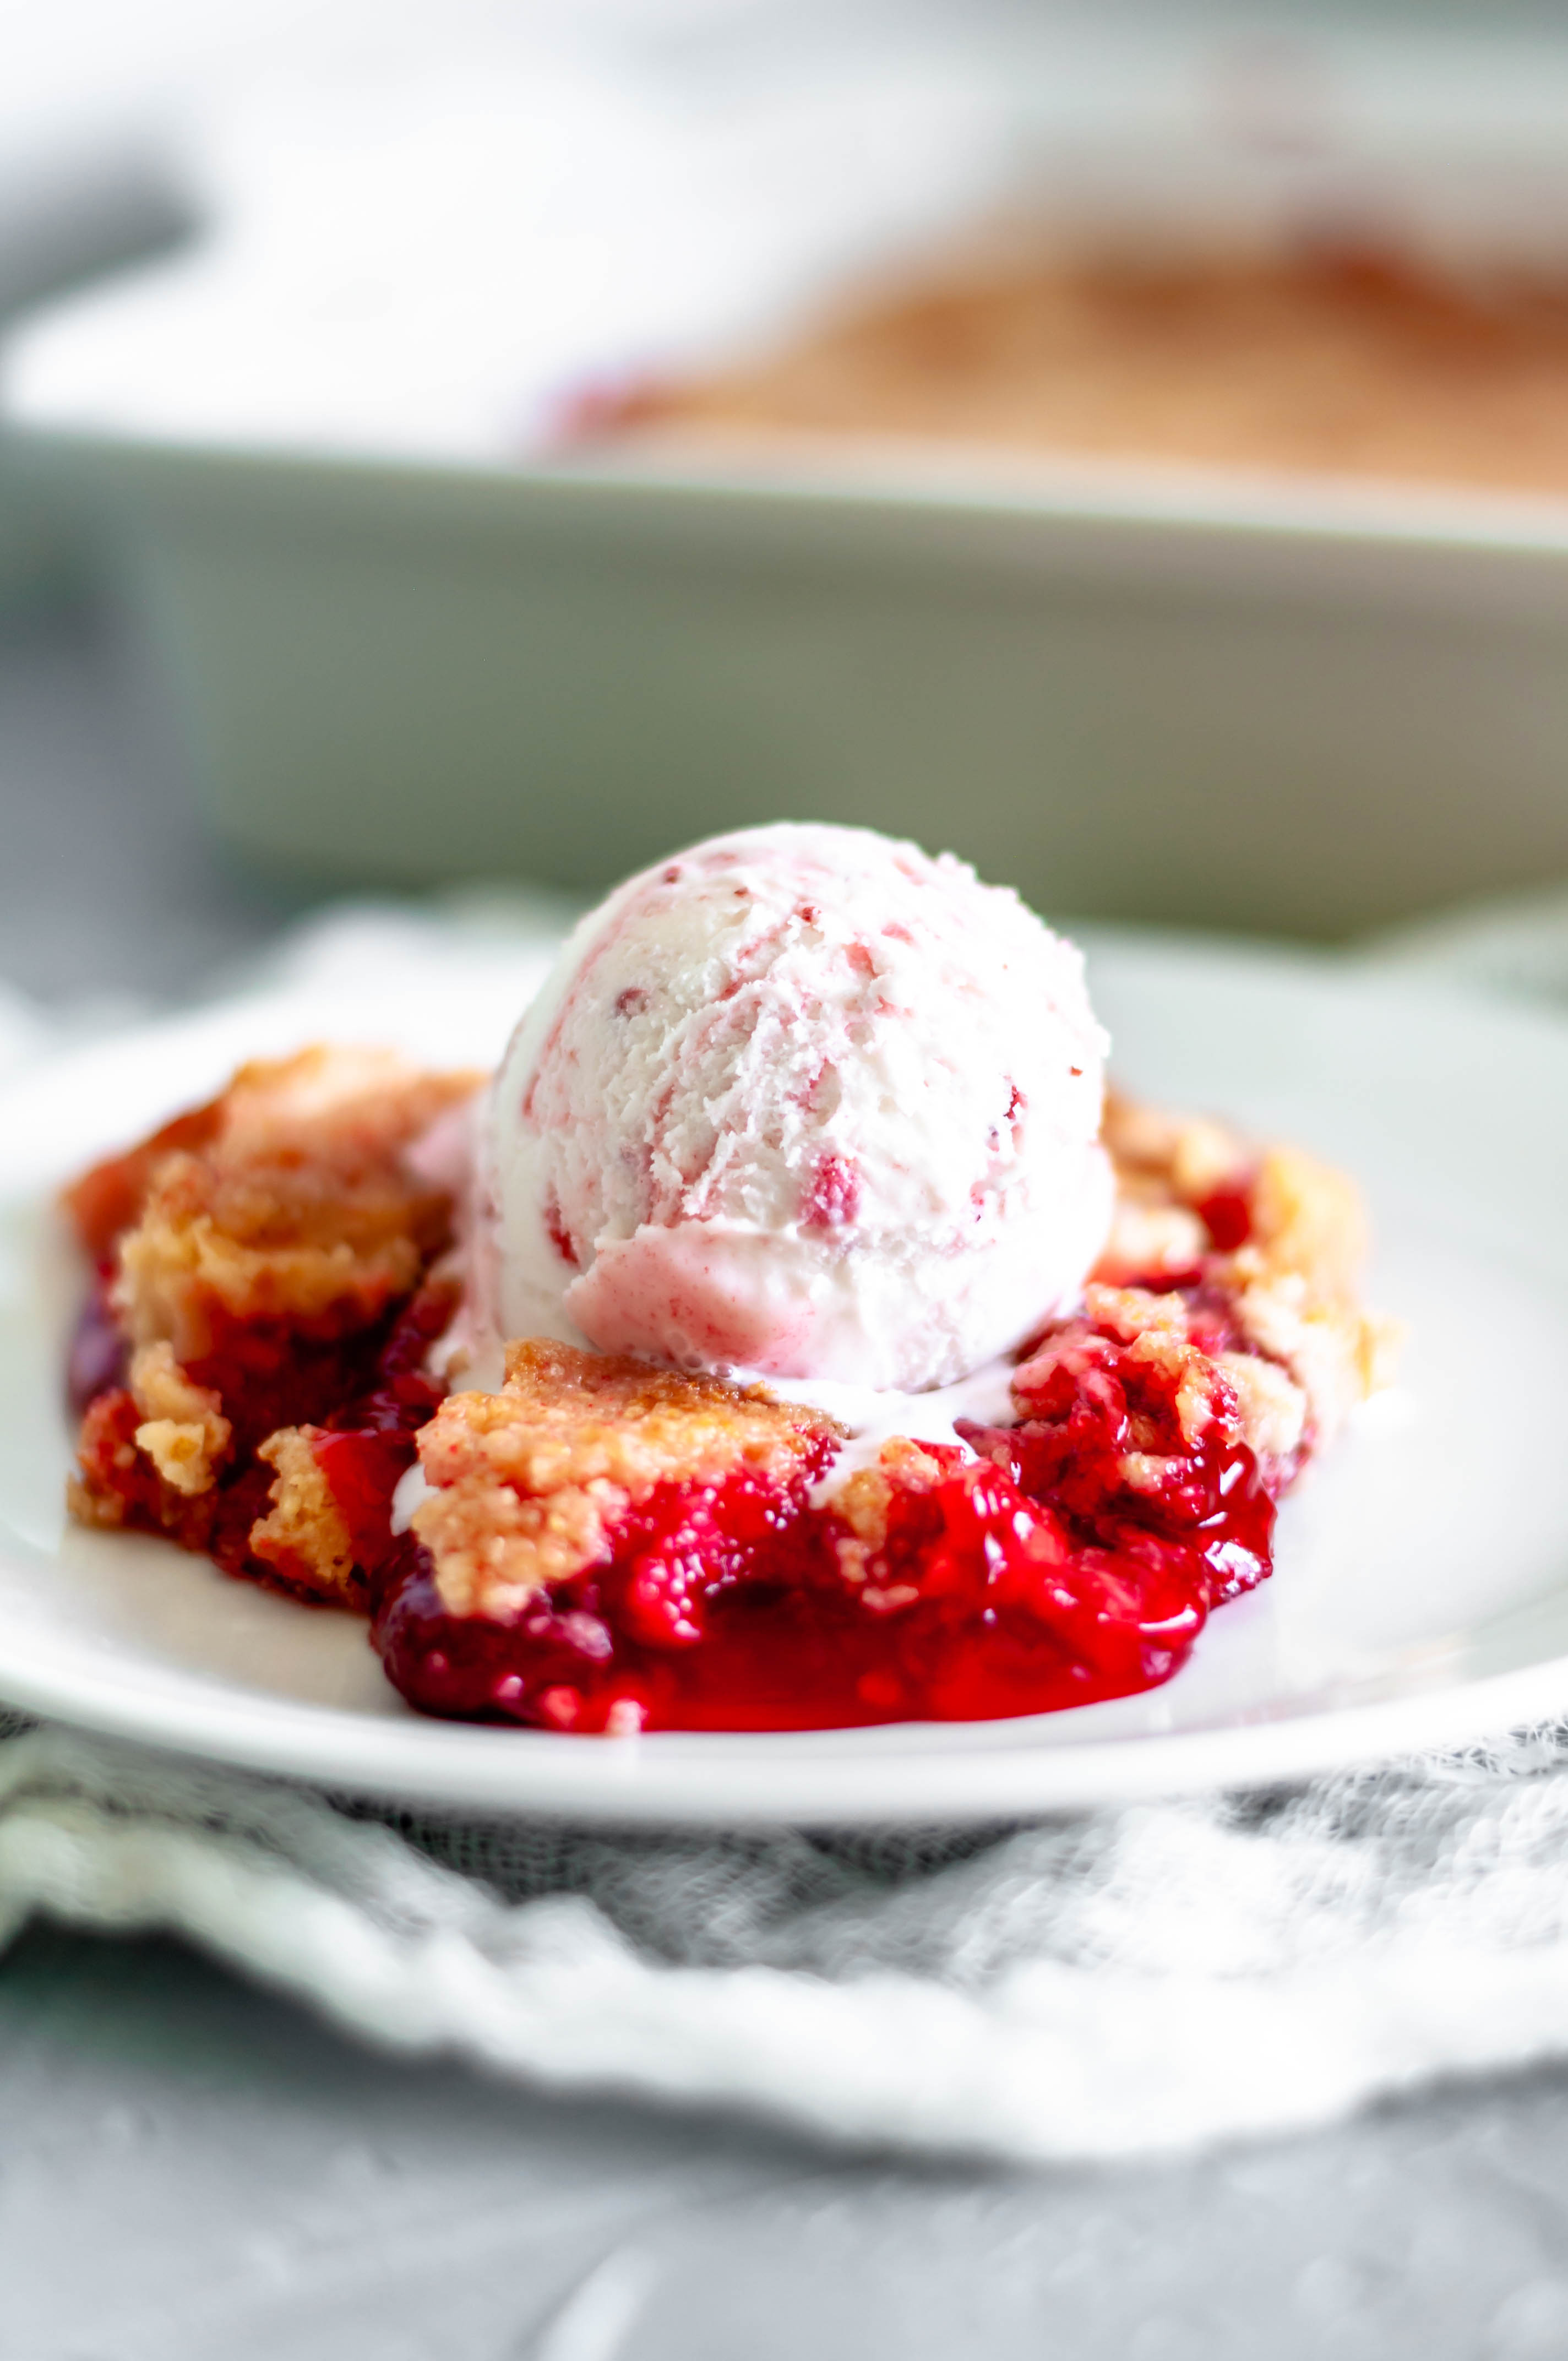 This Triple Strawberry Dump Cake is the perfect dessert for all your summer gatherings and potlucks. Just 4 simple ingredients to make this flavorful, texture filled cake.